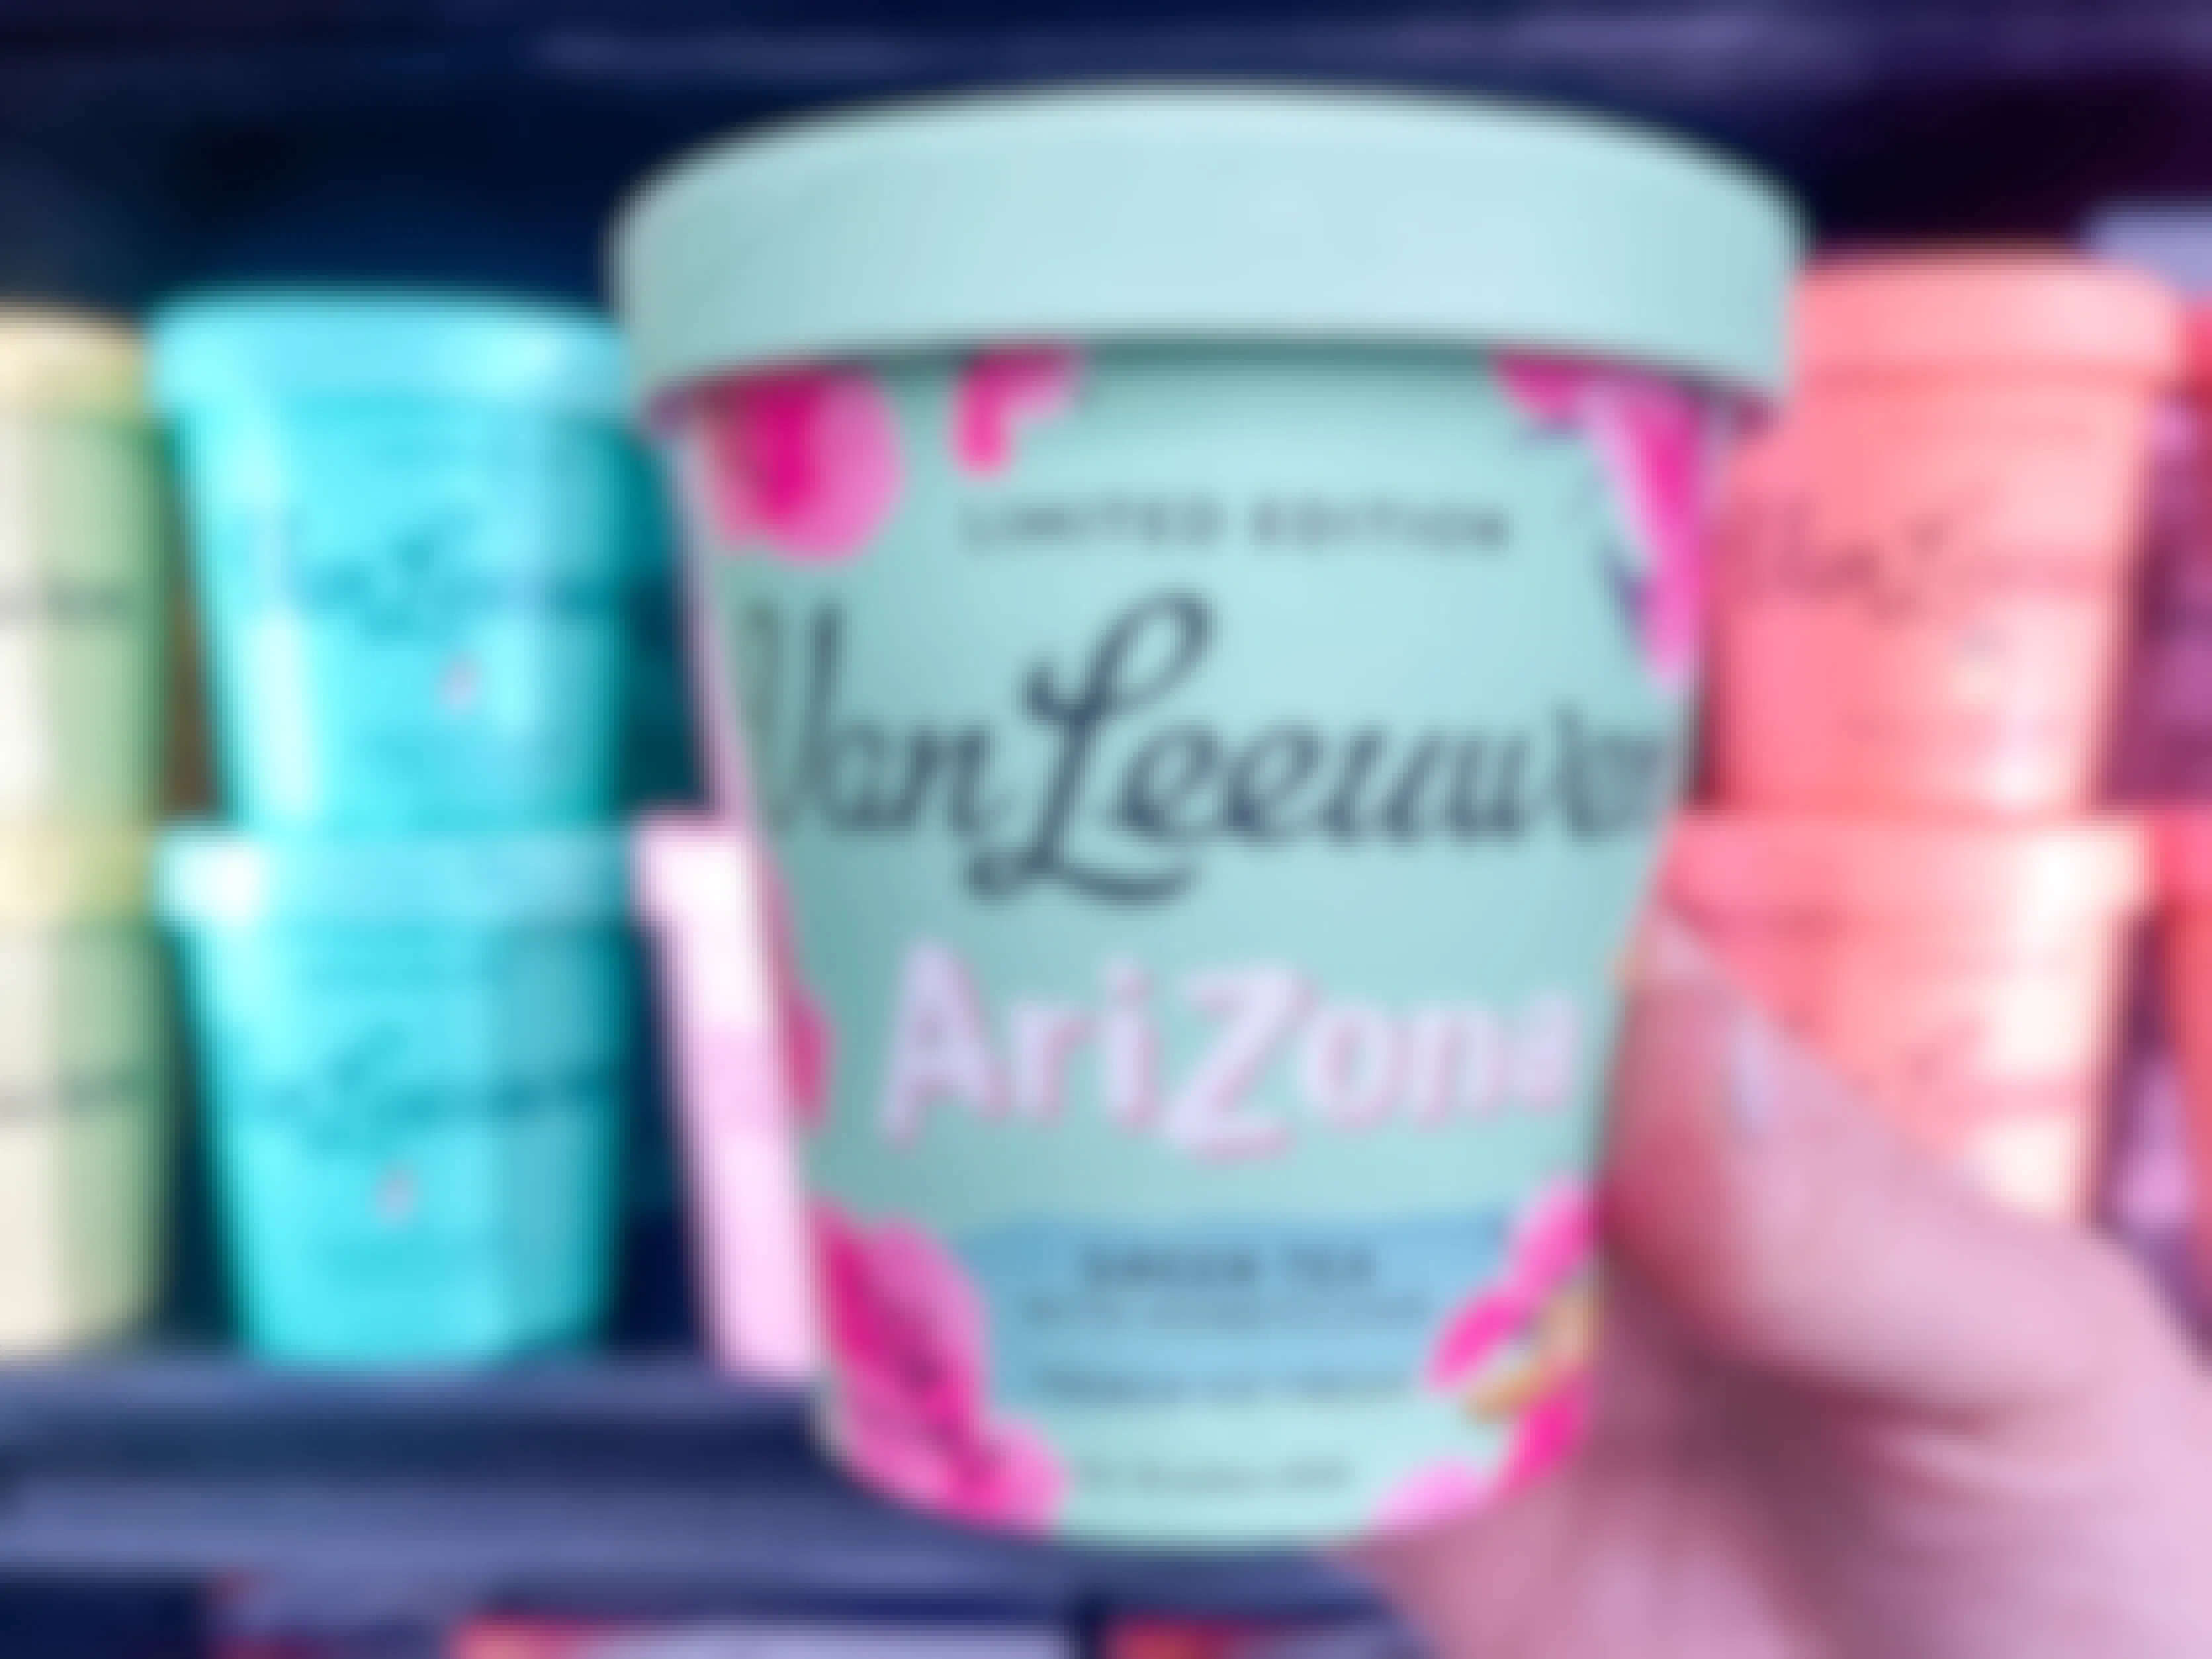 Ice Cream being held in store